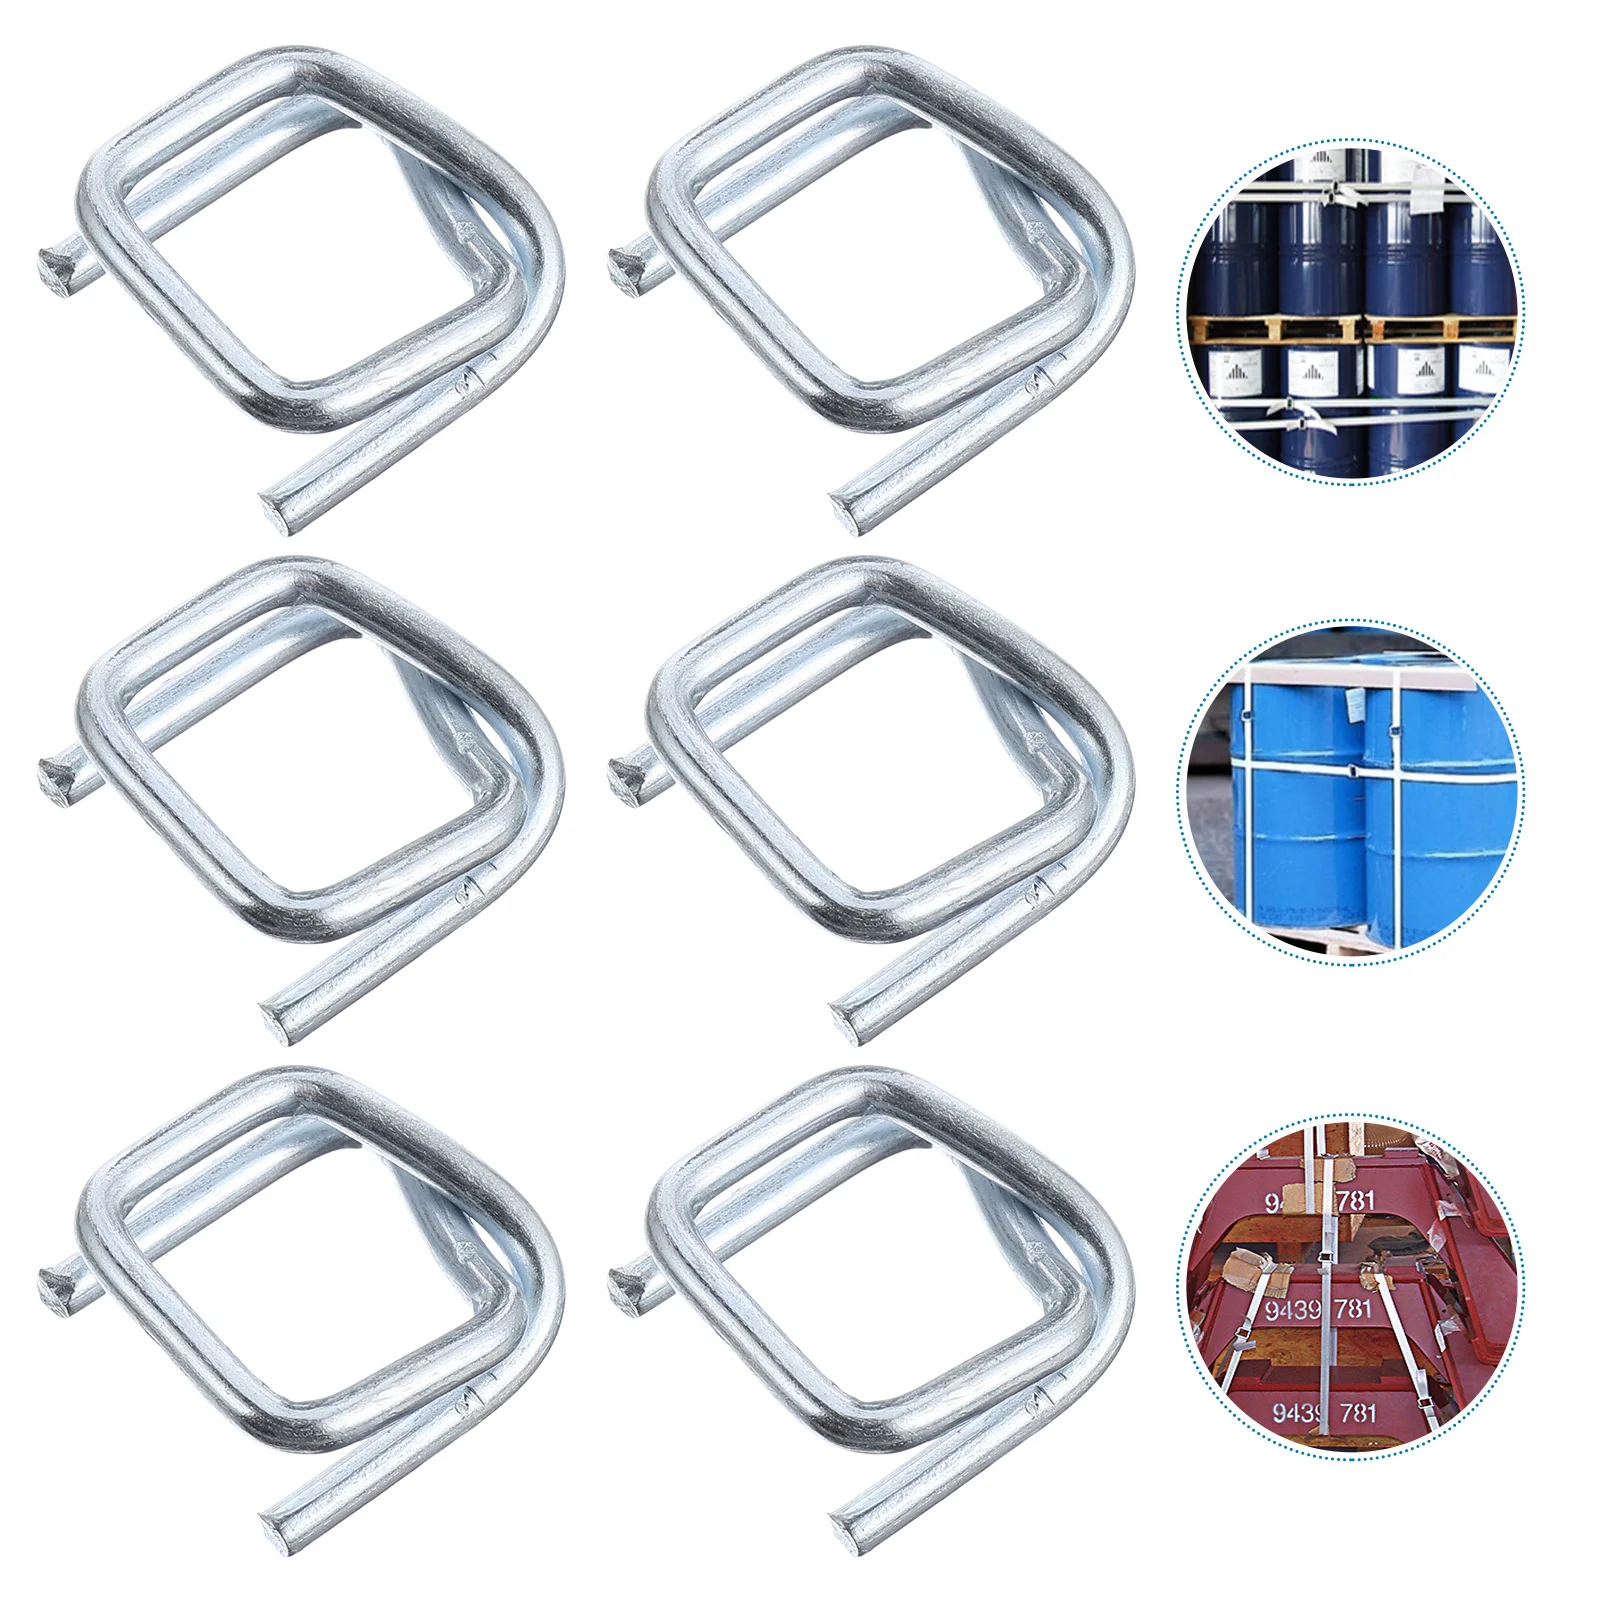 

Buckle Buckles Strapping Metal Wire Strap Cord Clamps Packaging Adjuster Straps Ring Inch Slide 4 Rope Keeper Accessory Package